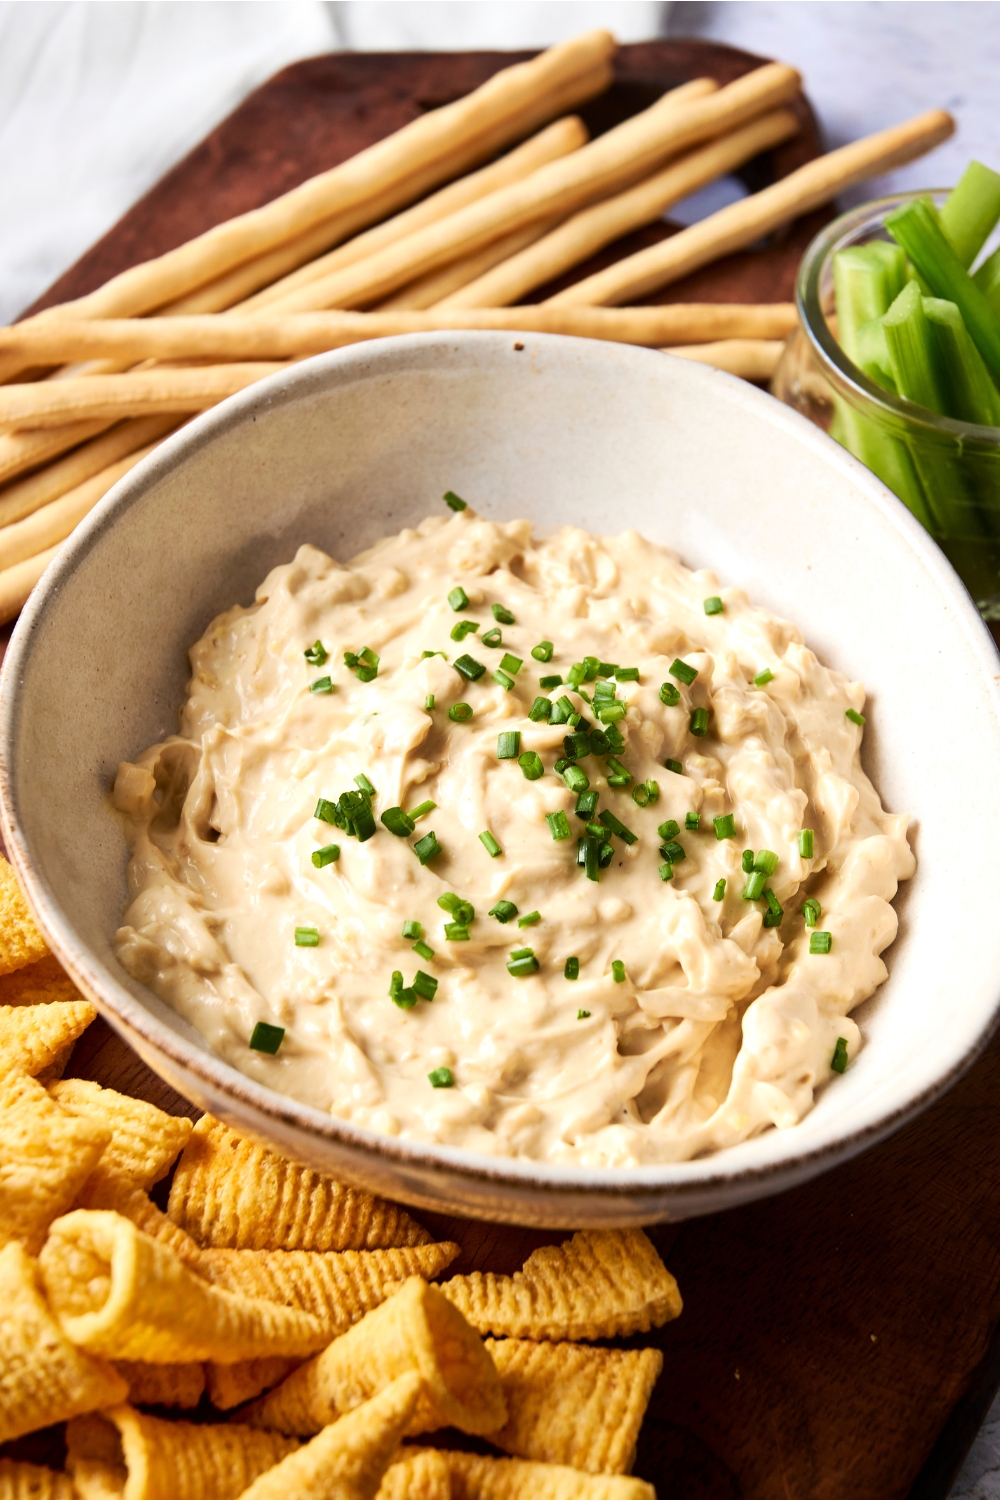 A large white bowl is full of Lipton french onion dip. The dip is garnished with chives and various crackers are nearby.